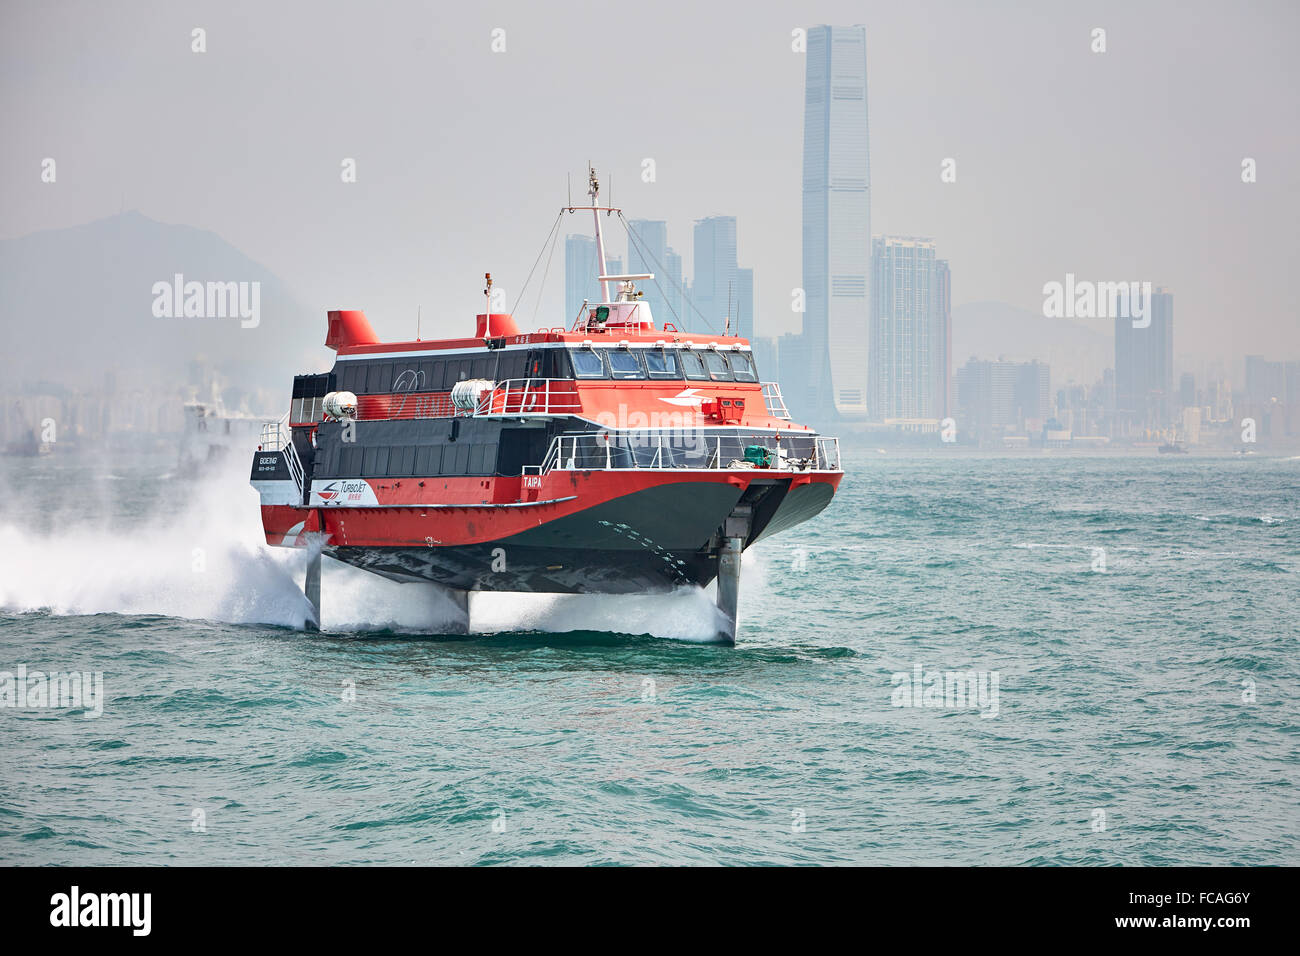 A TurboJET hydrofoil ferry leaves Hong Kong to make its way to Macau with Hong Kong's cityscape in the background. Stock Photo